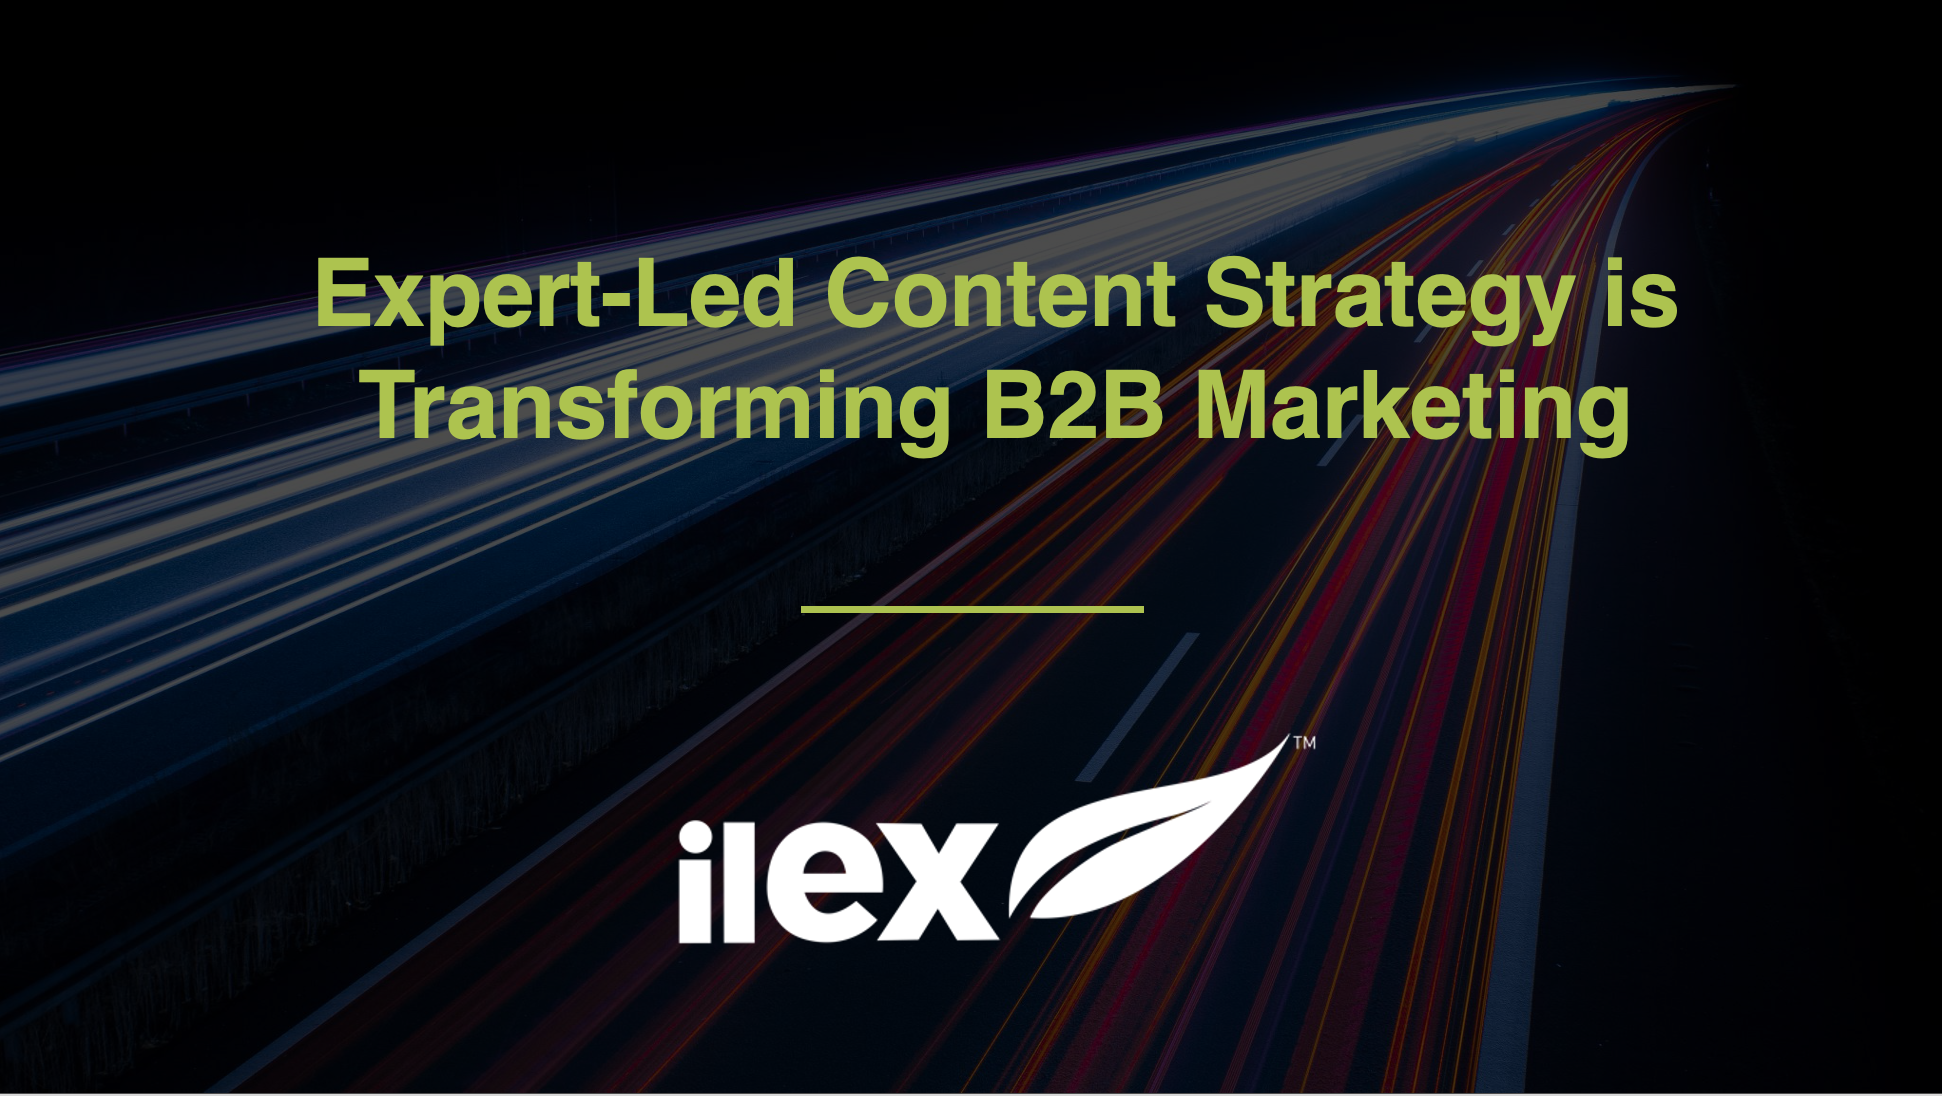 Expert-Led Content Strategy is Transforming B2B Marketing